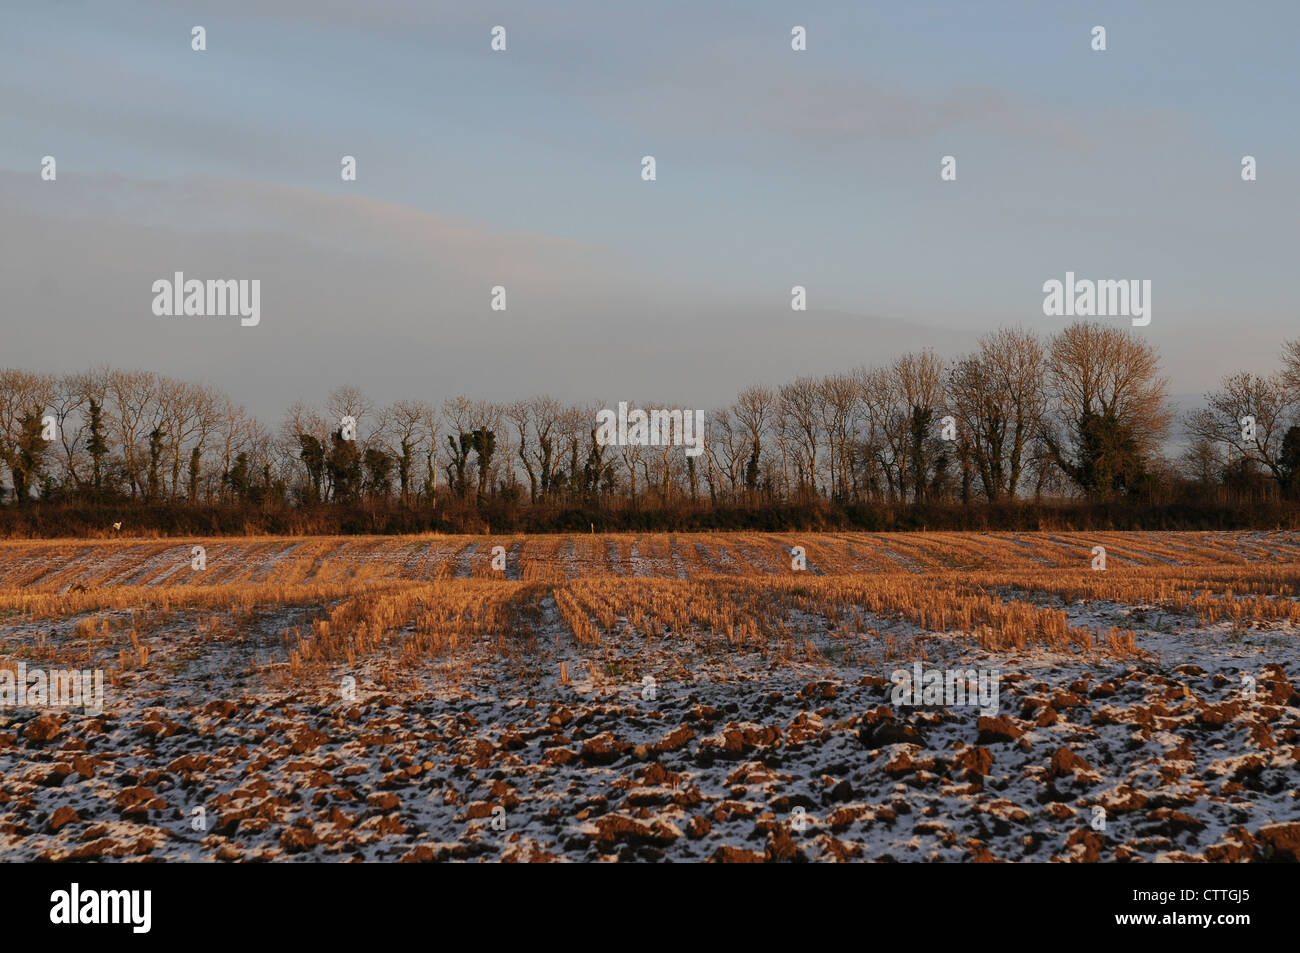 Golden winter sunset on a field of wheat stubble and snow. Stock Photo